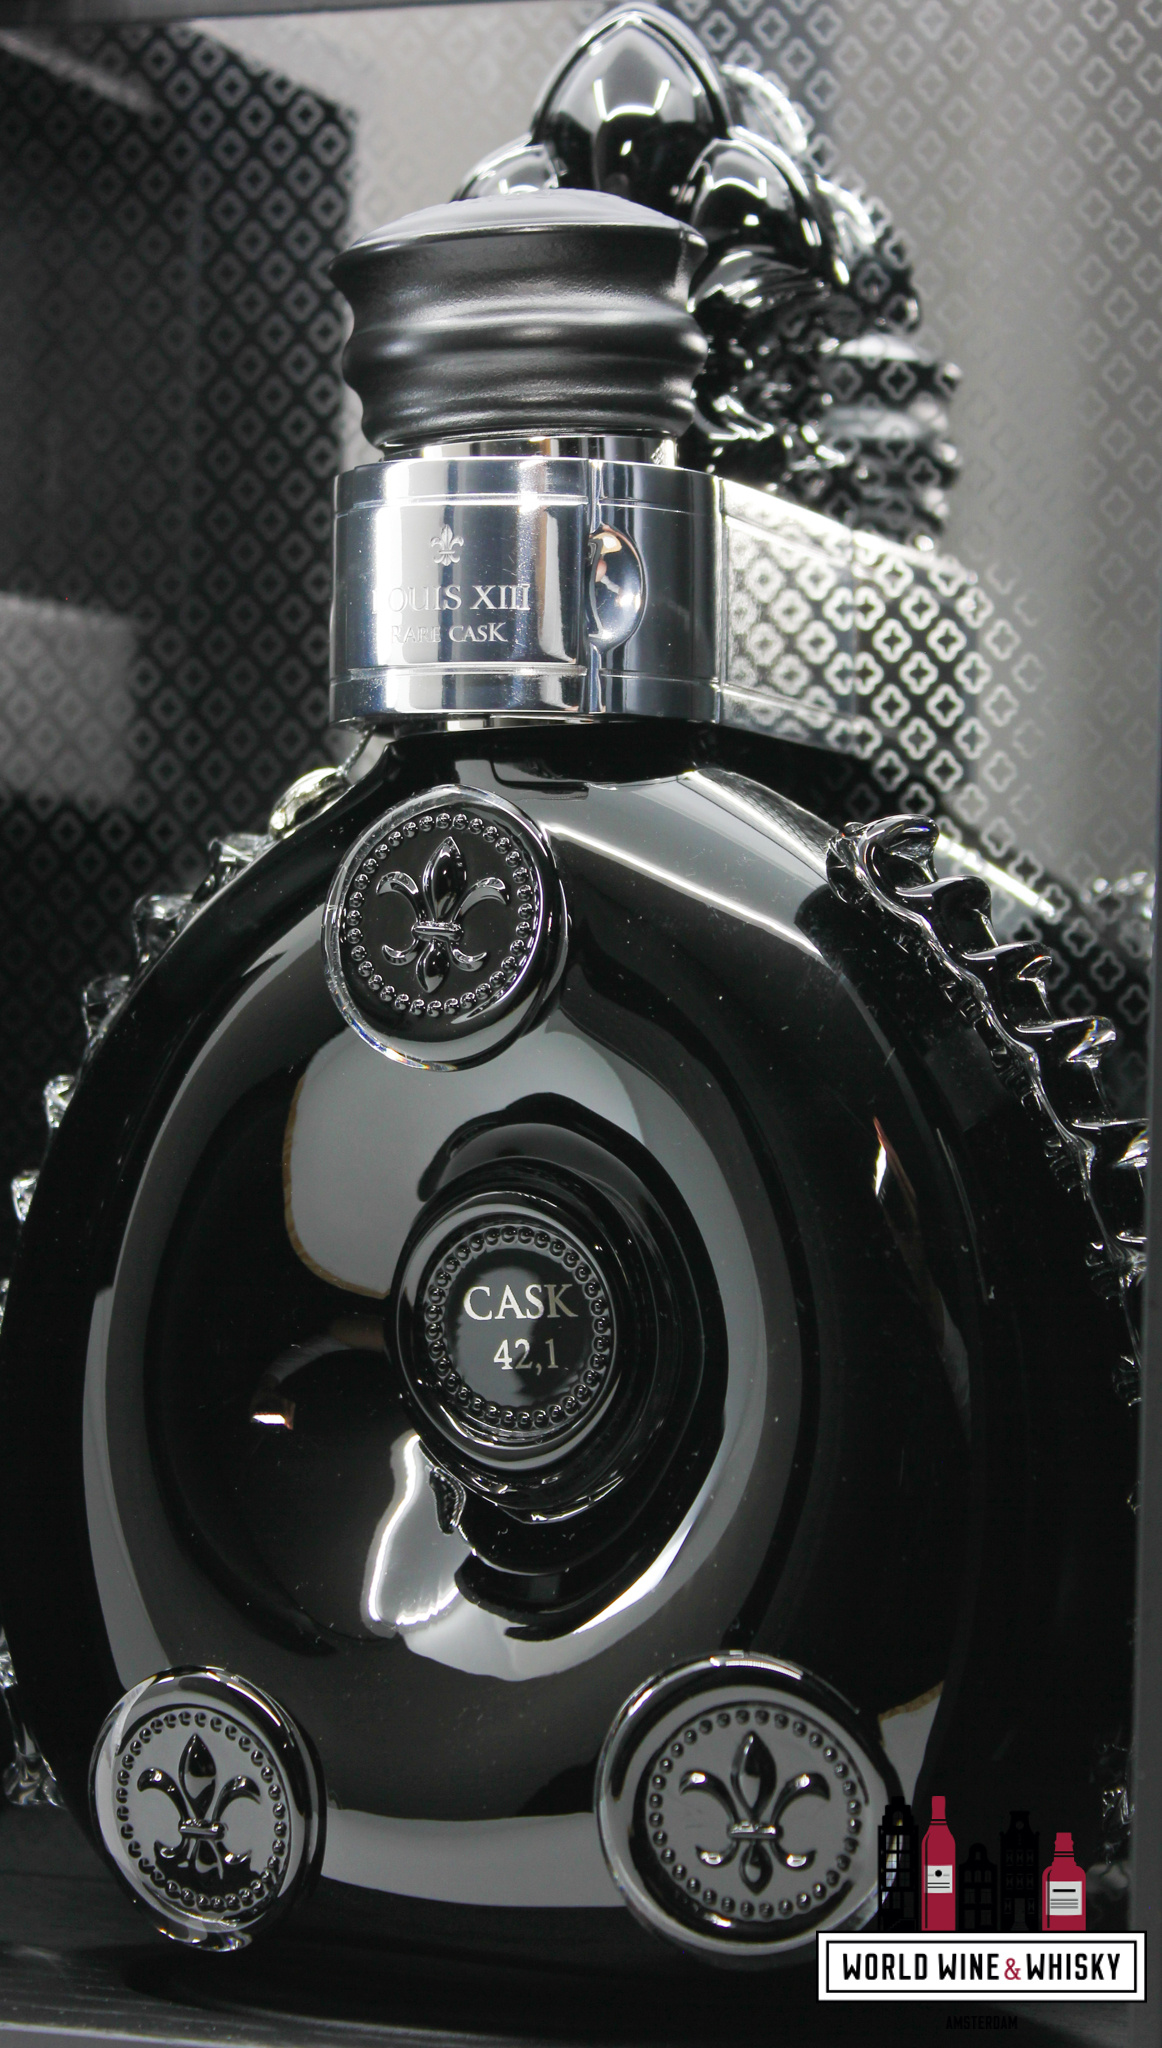 Louis XIII Louis XIII 2023 - Rare Cask 42.1 - Baccarat Black Crystal Decanter 42.1% (1 of 775)